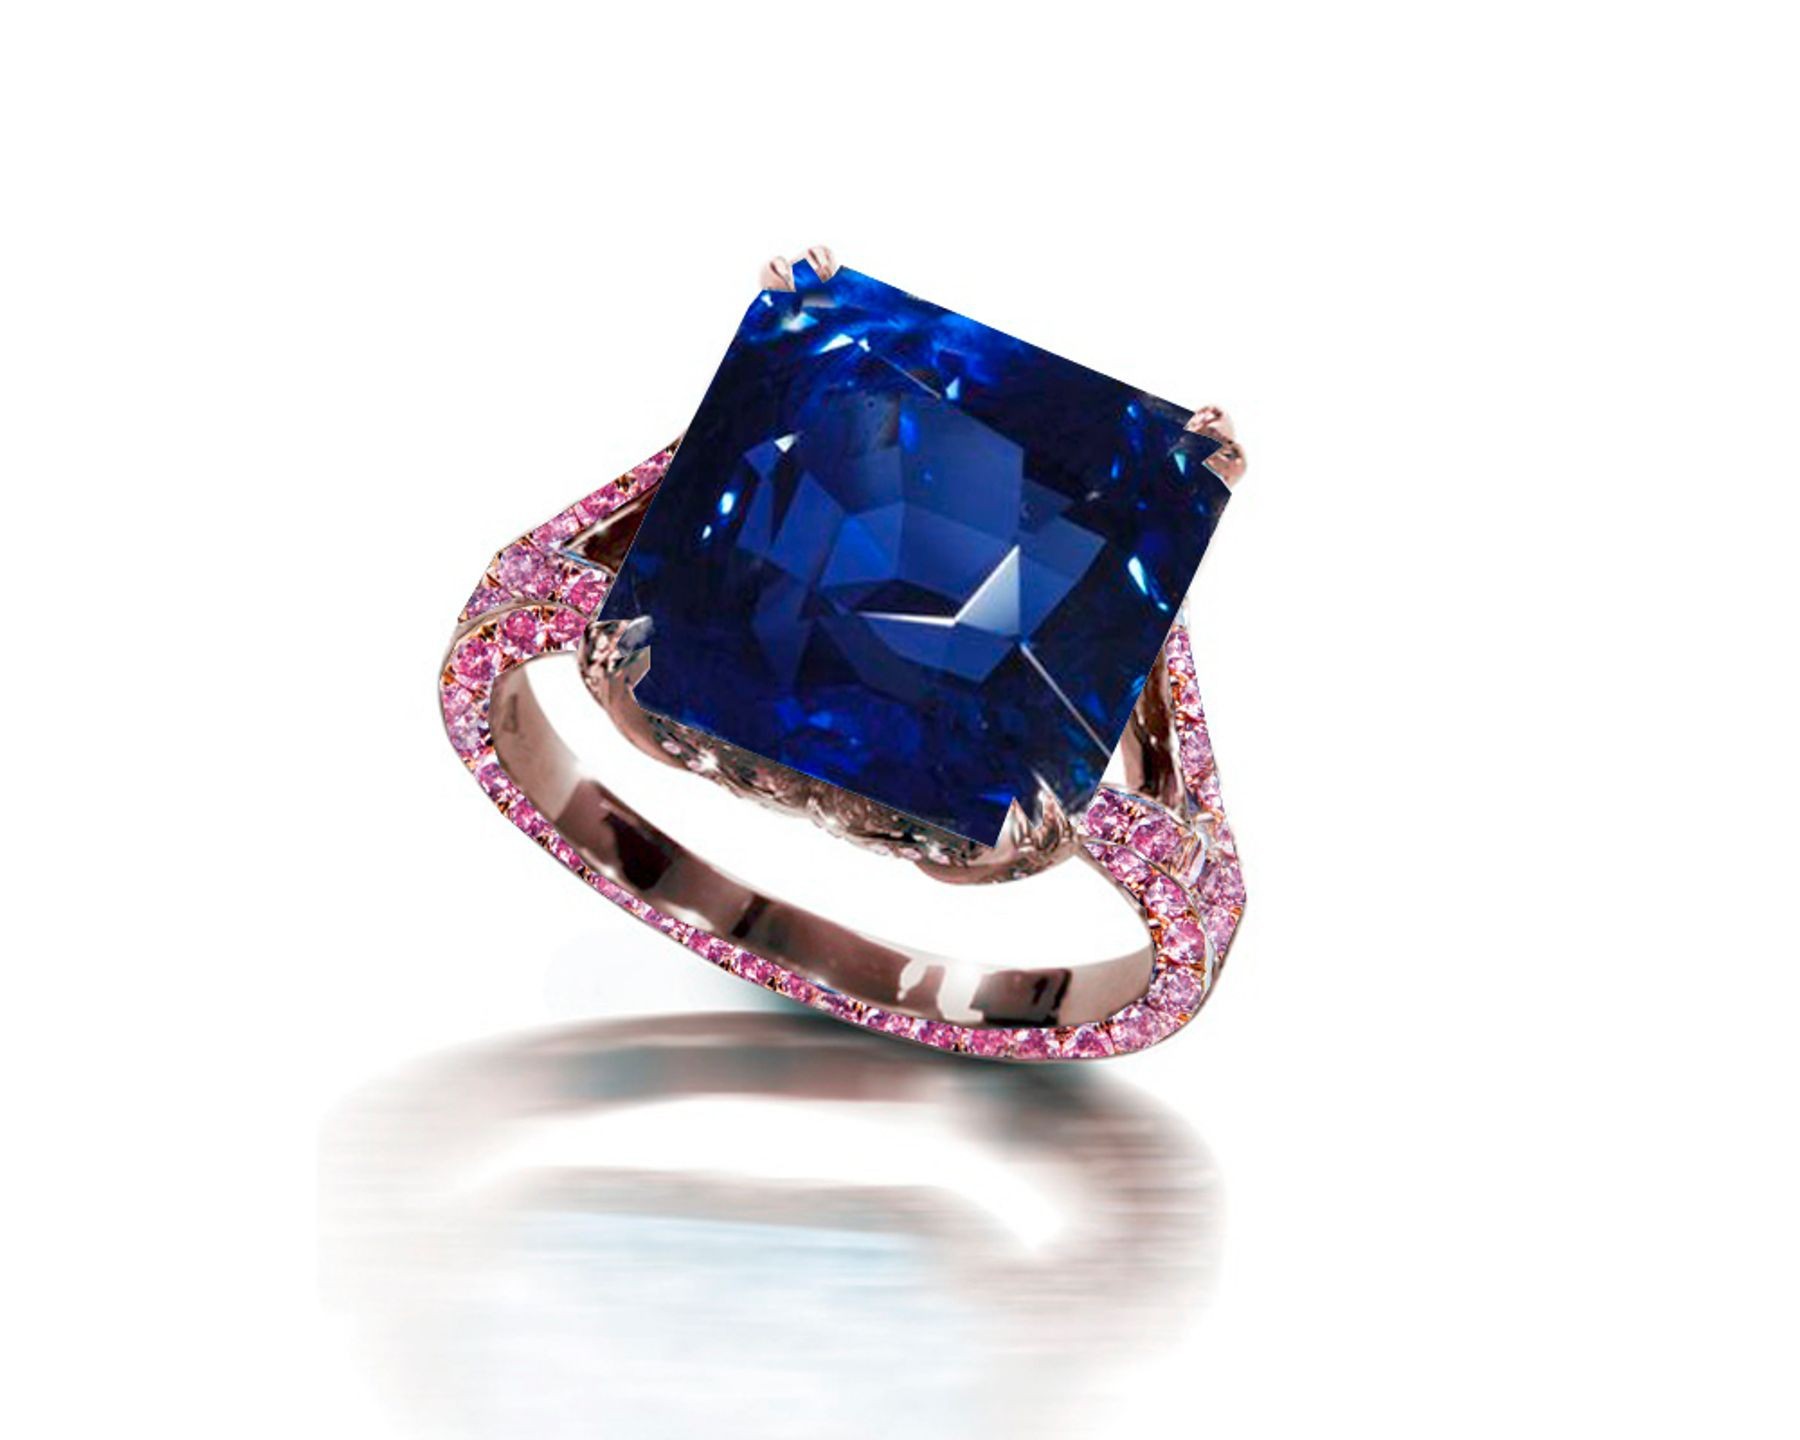 Ring with Blue Sapphire & Pave Set Pink Sapphires in Gold or Platinum